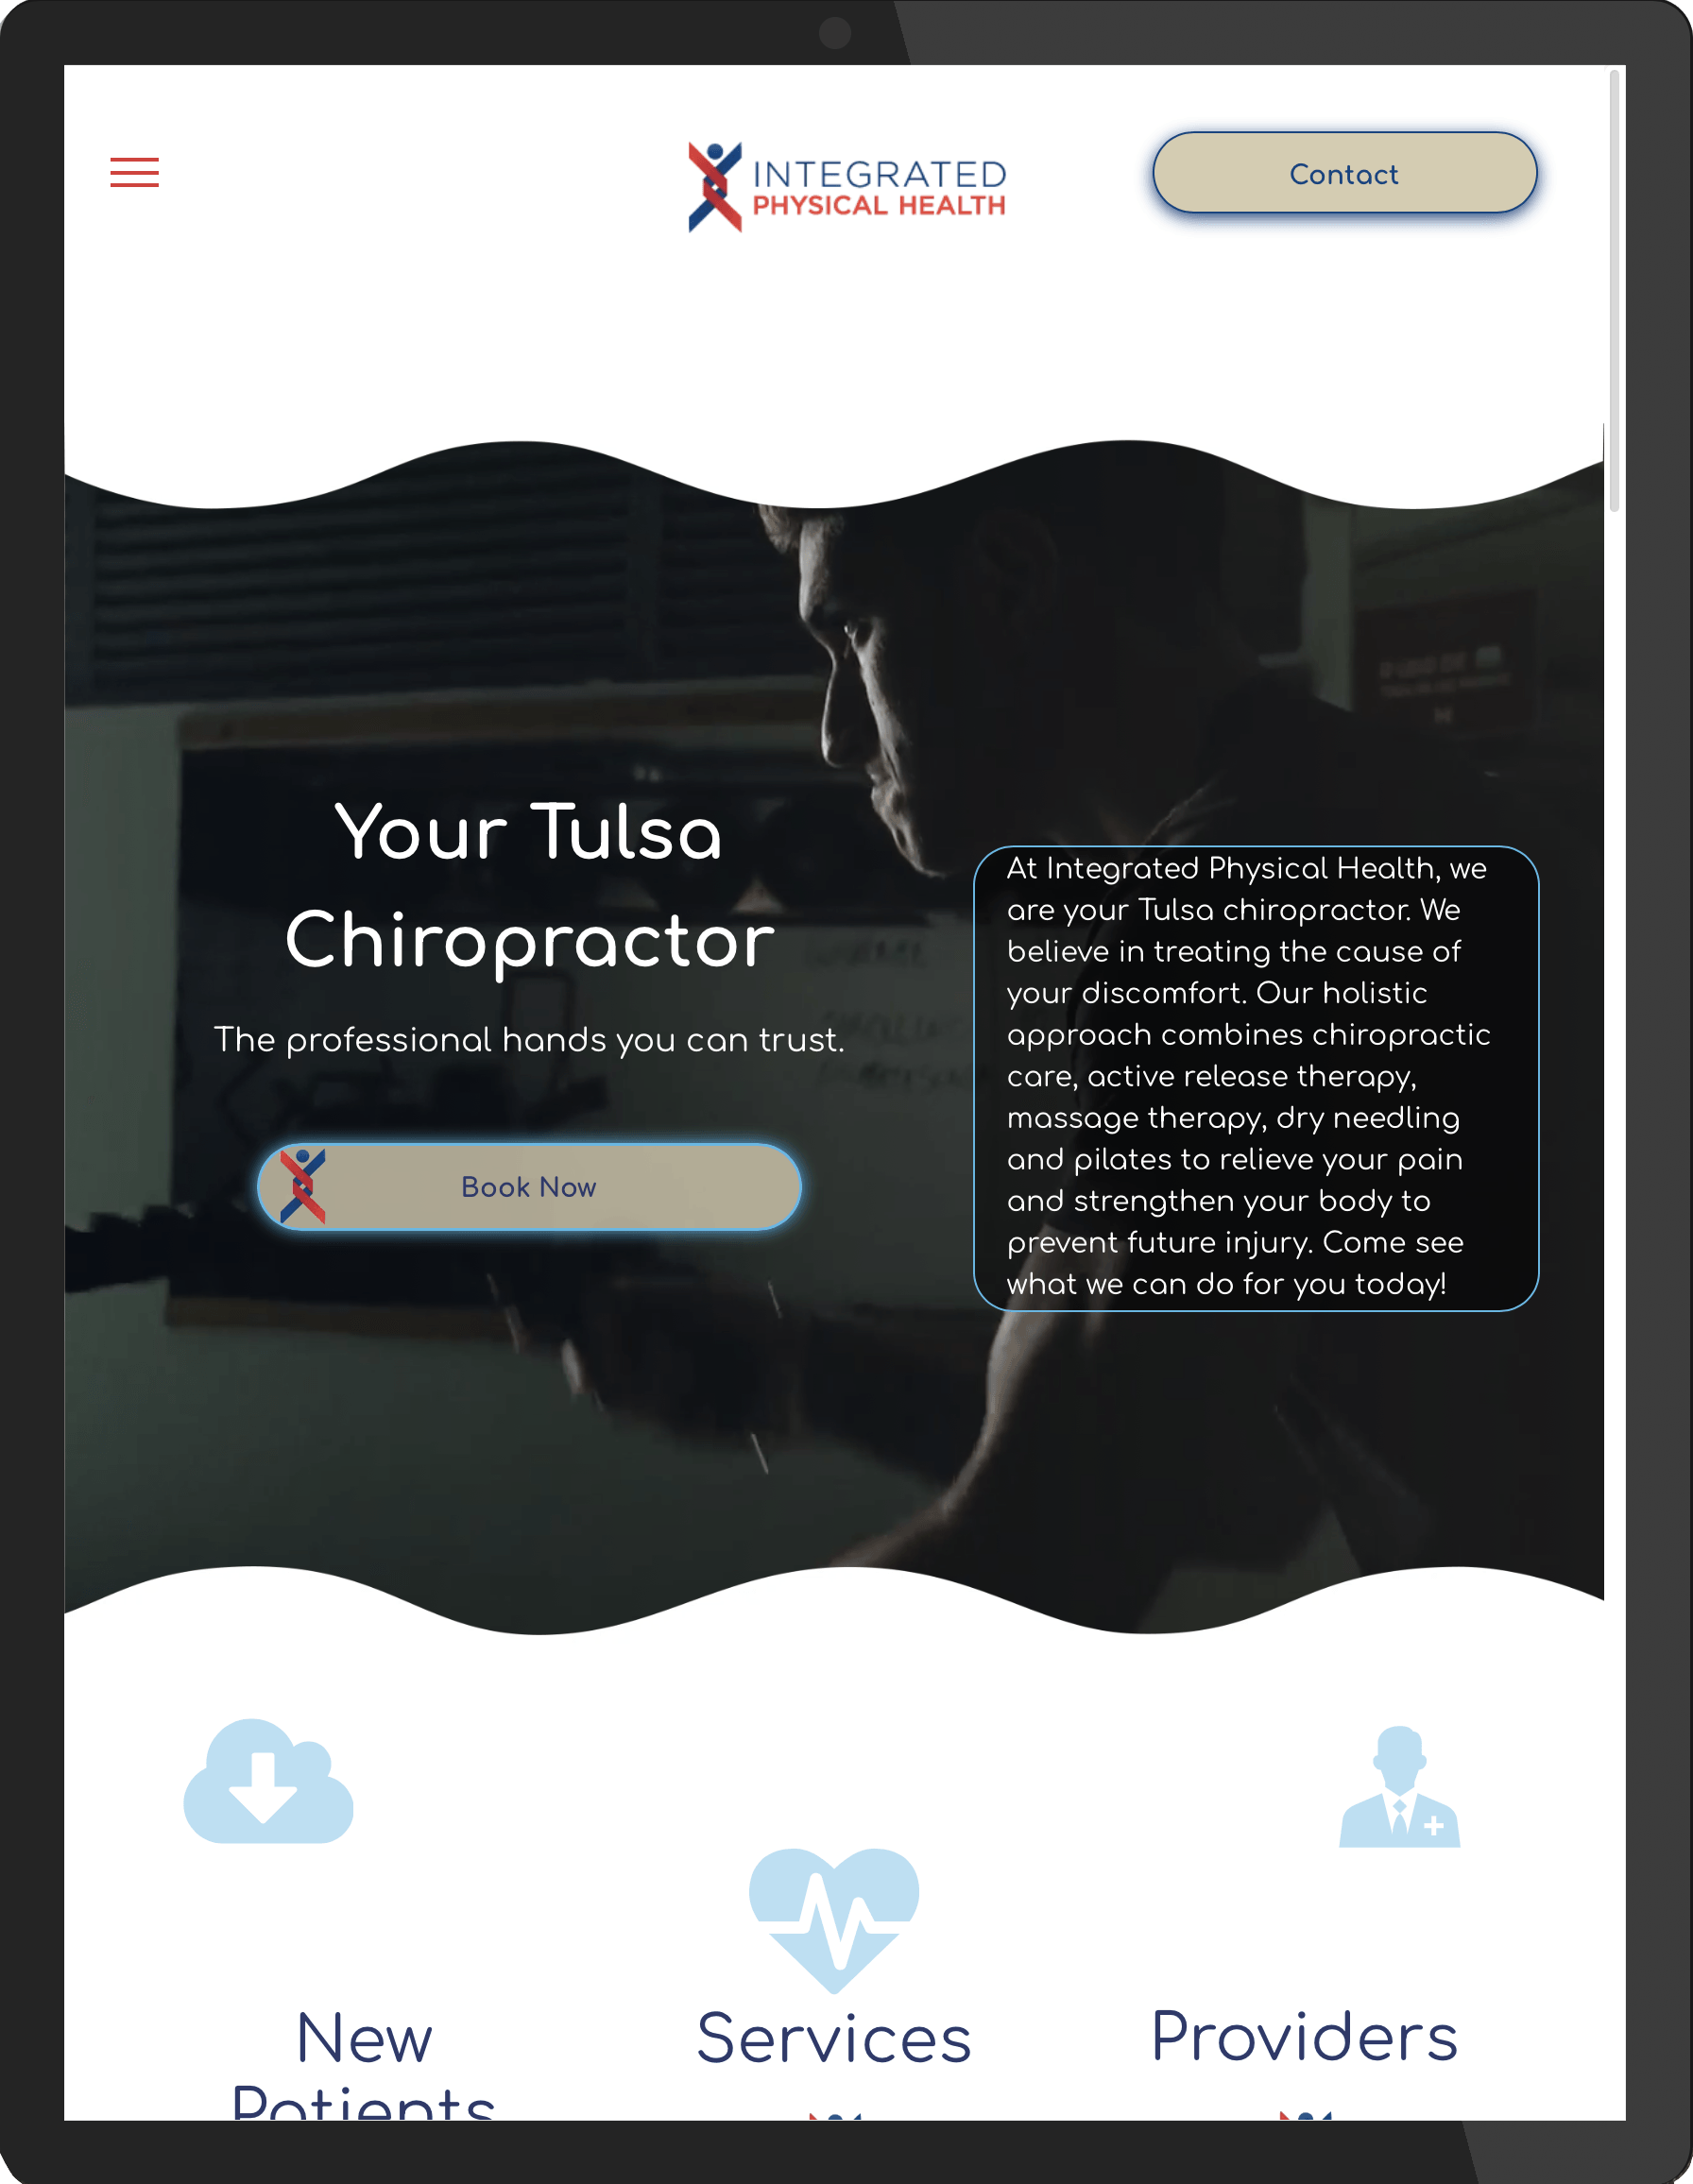 A tablet screen shows a website for a tulsa chiropractor.